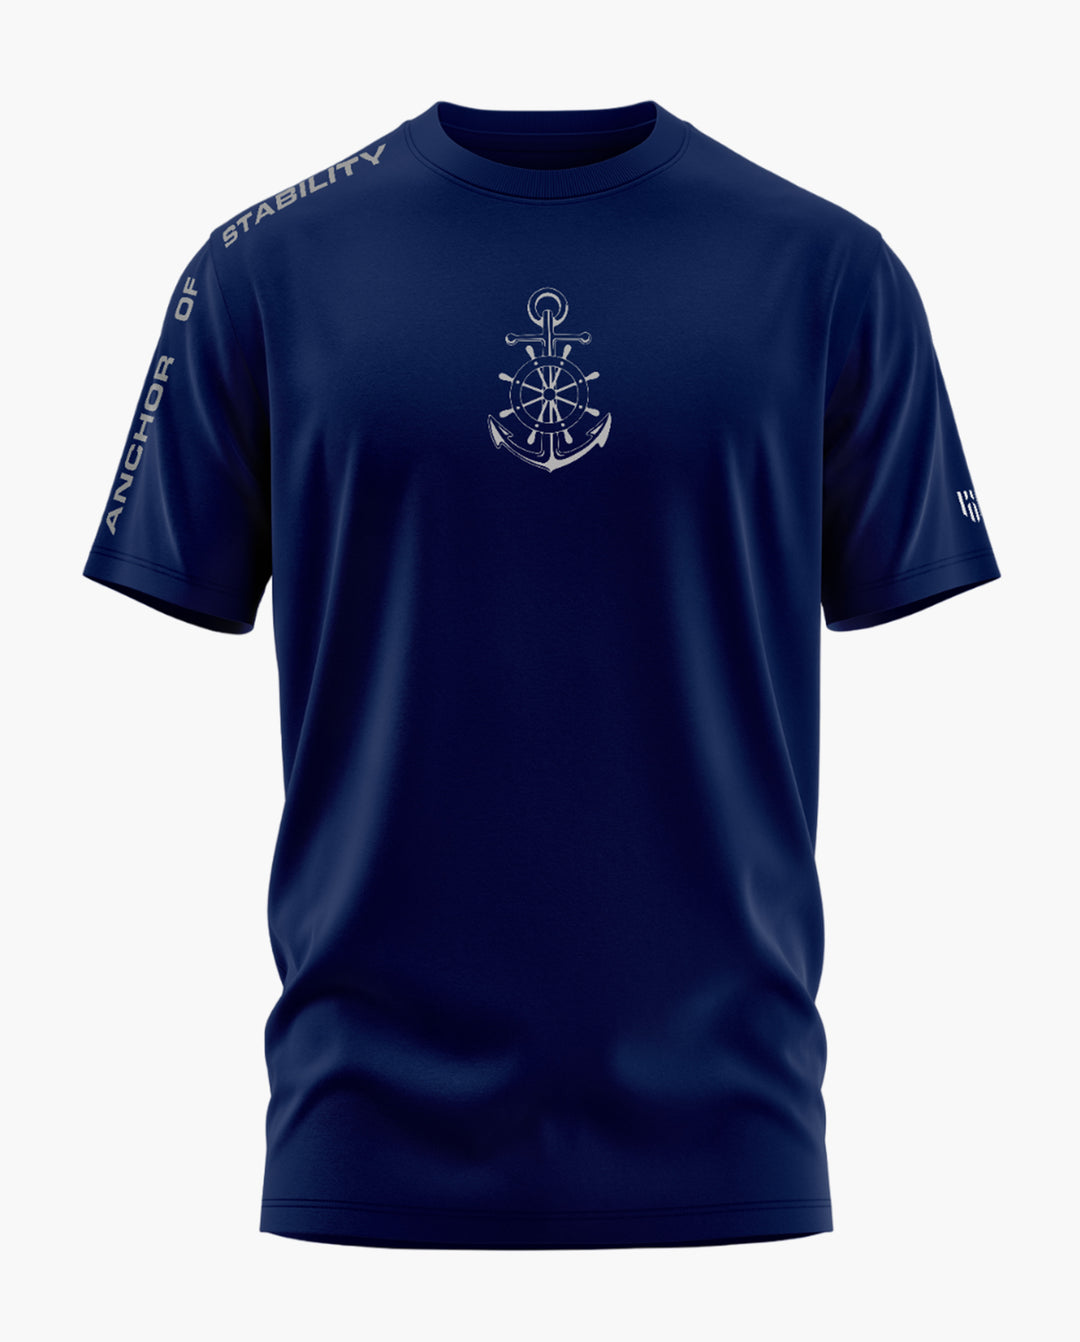 ANCHOR OF STABILITY T-Shirt